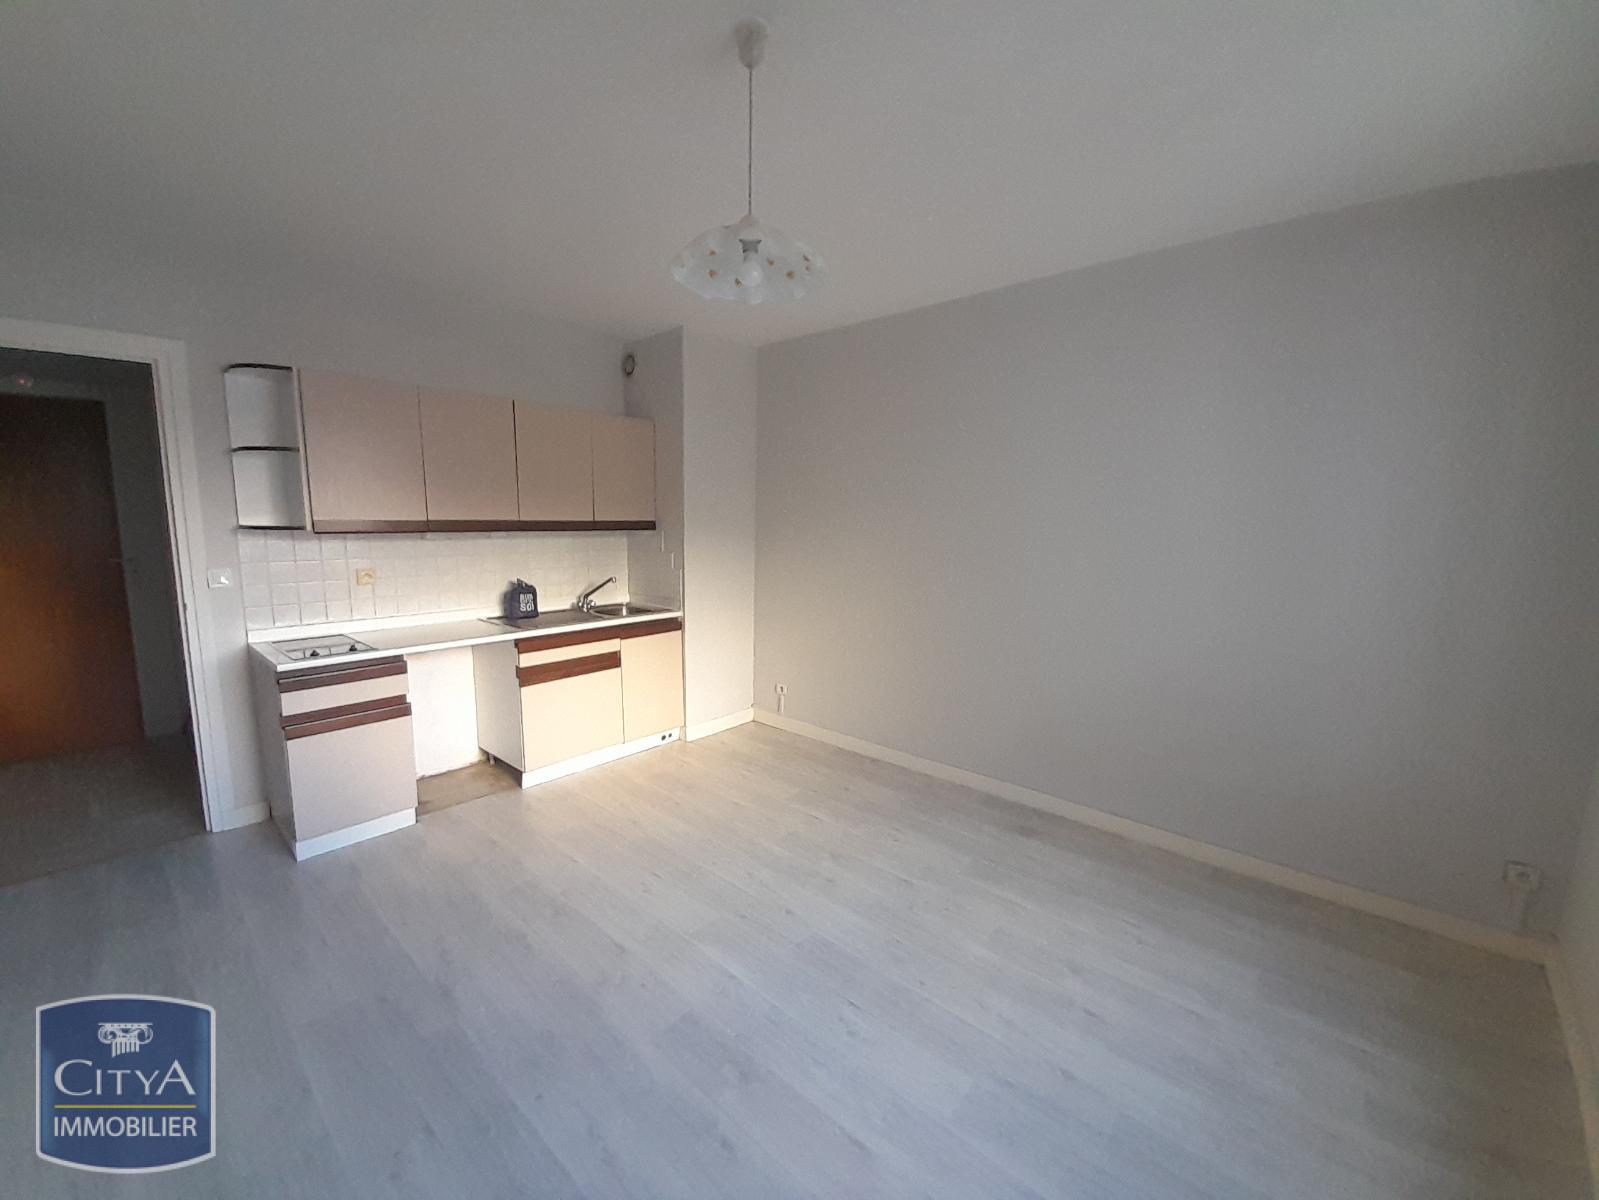 Appartement 1 pièce - 23m² - CHAMBERY